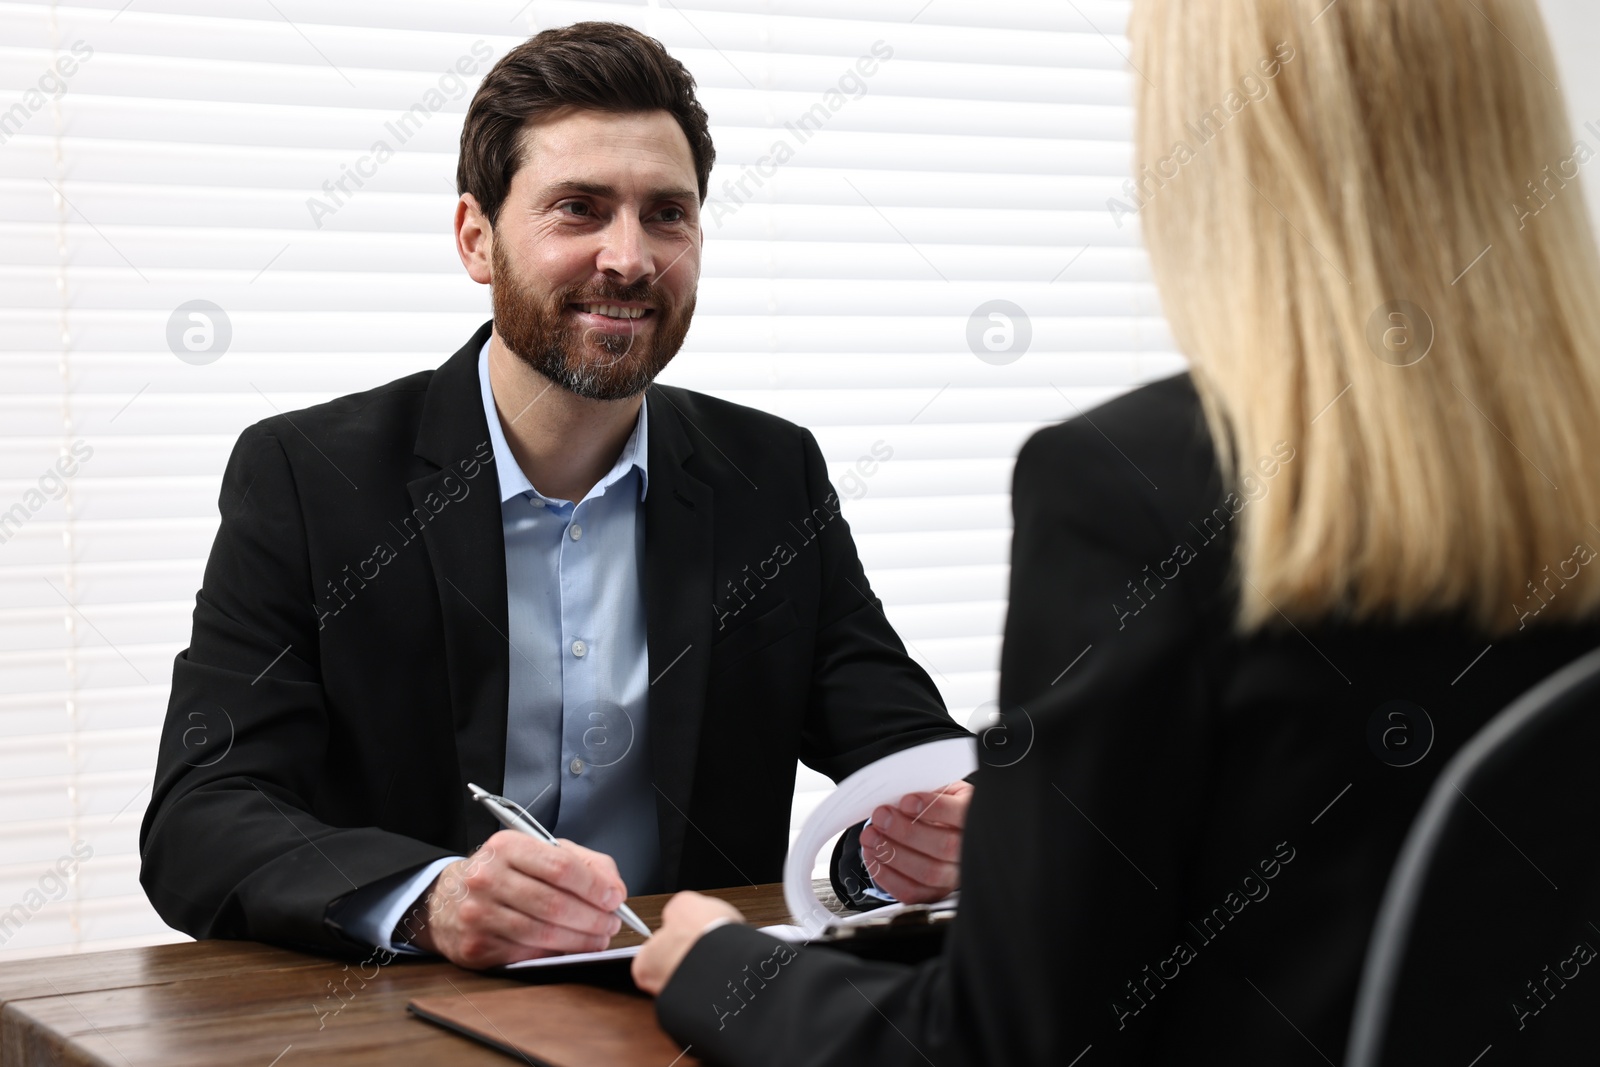 Photo of Man signing document at table in lawyer's office